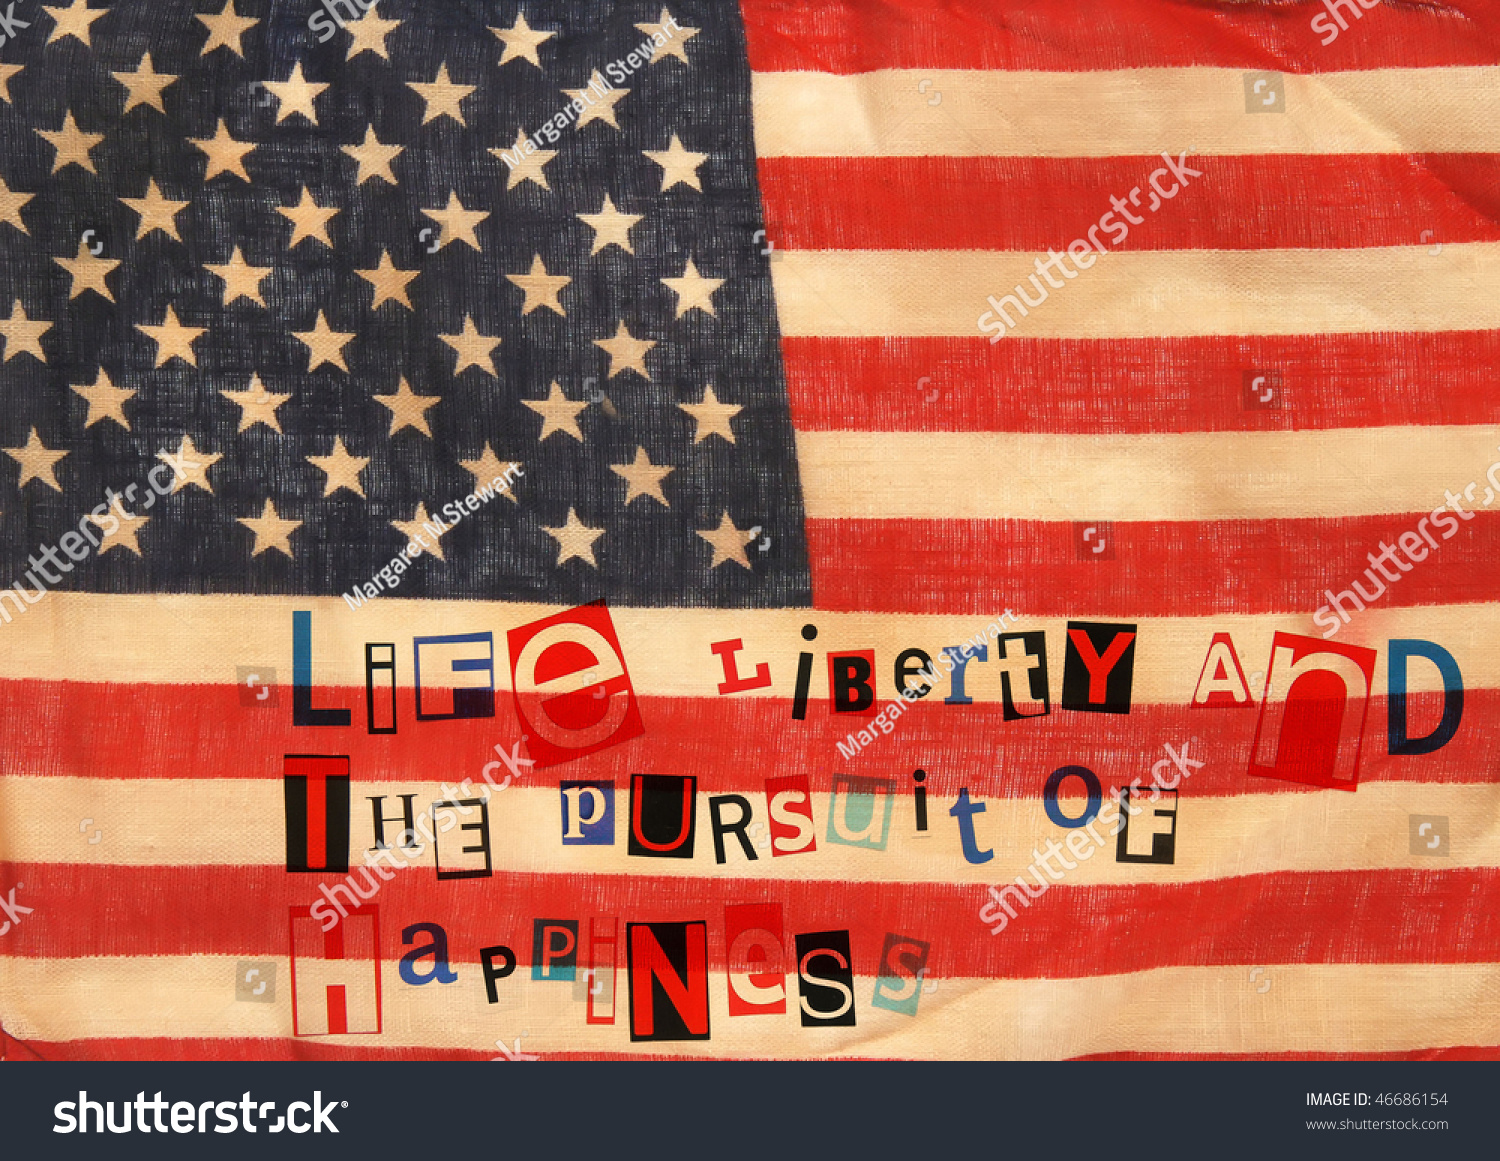 old flag with patriotic overlay "life liberty and the pursuit of happiness"